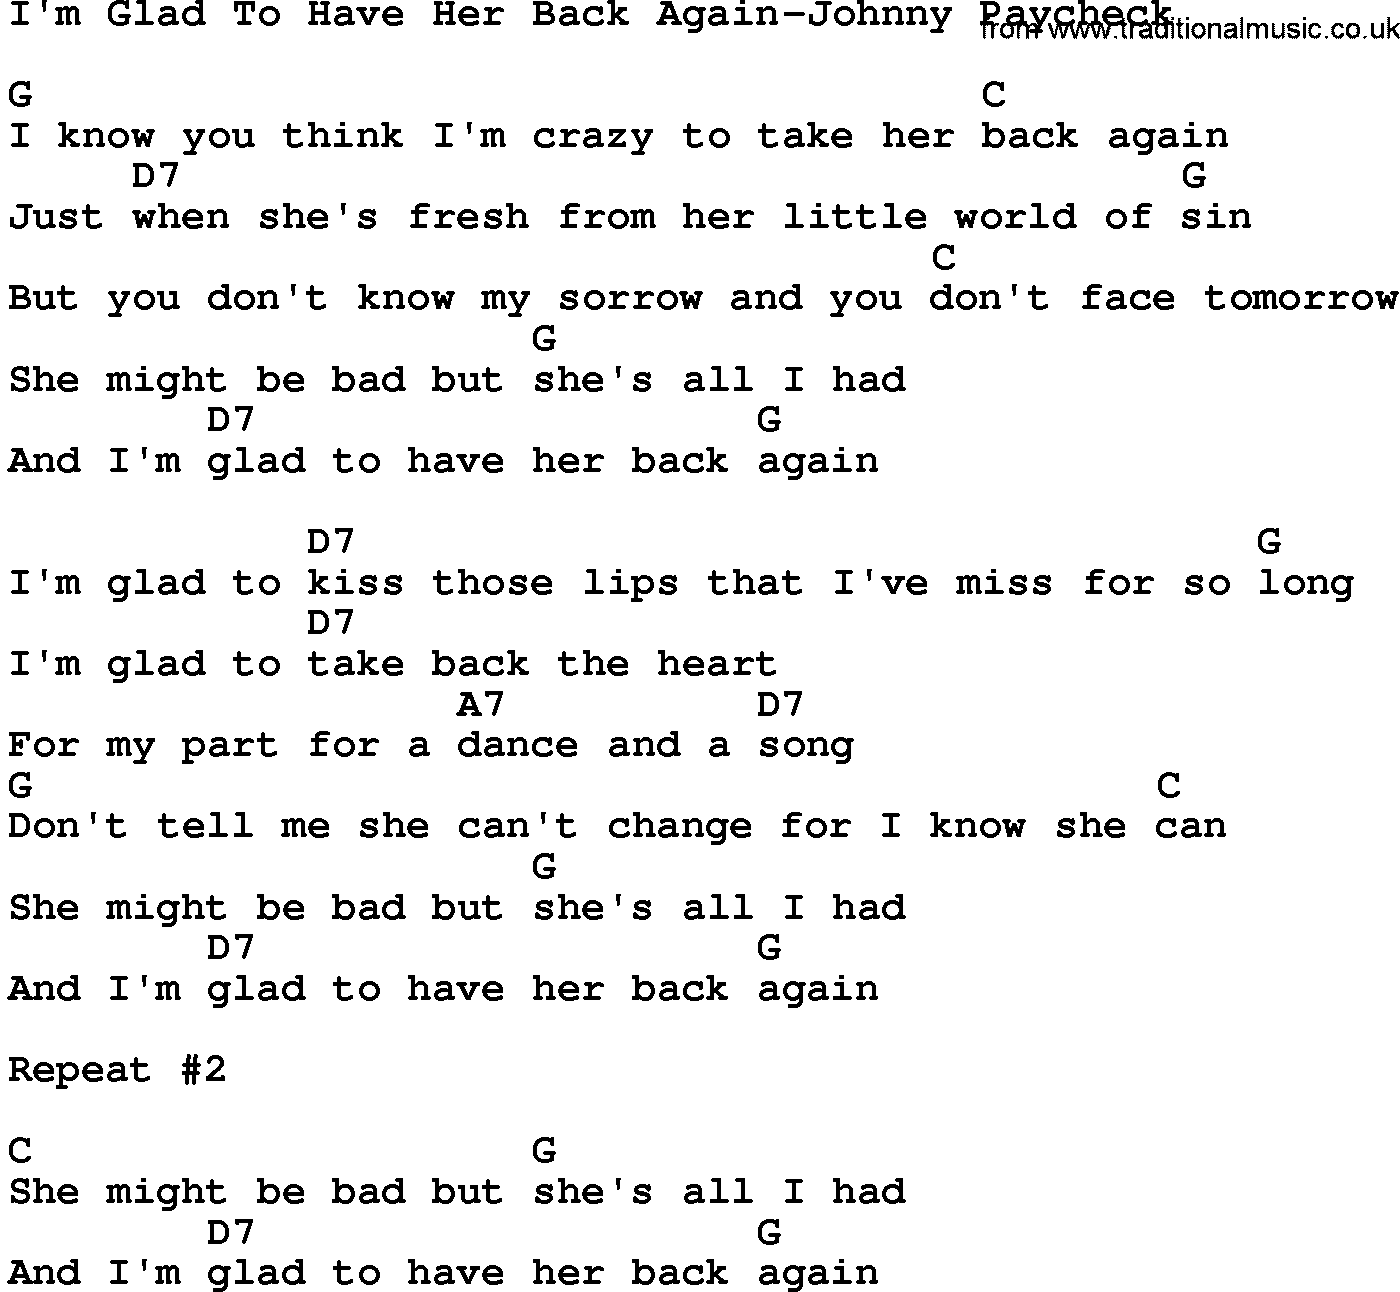 Country music song: I'm Glad To Have Her Back Again-Johnny Paycheck lyrics and chords